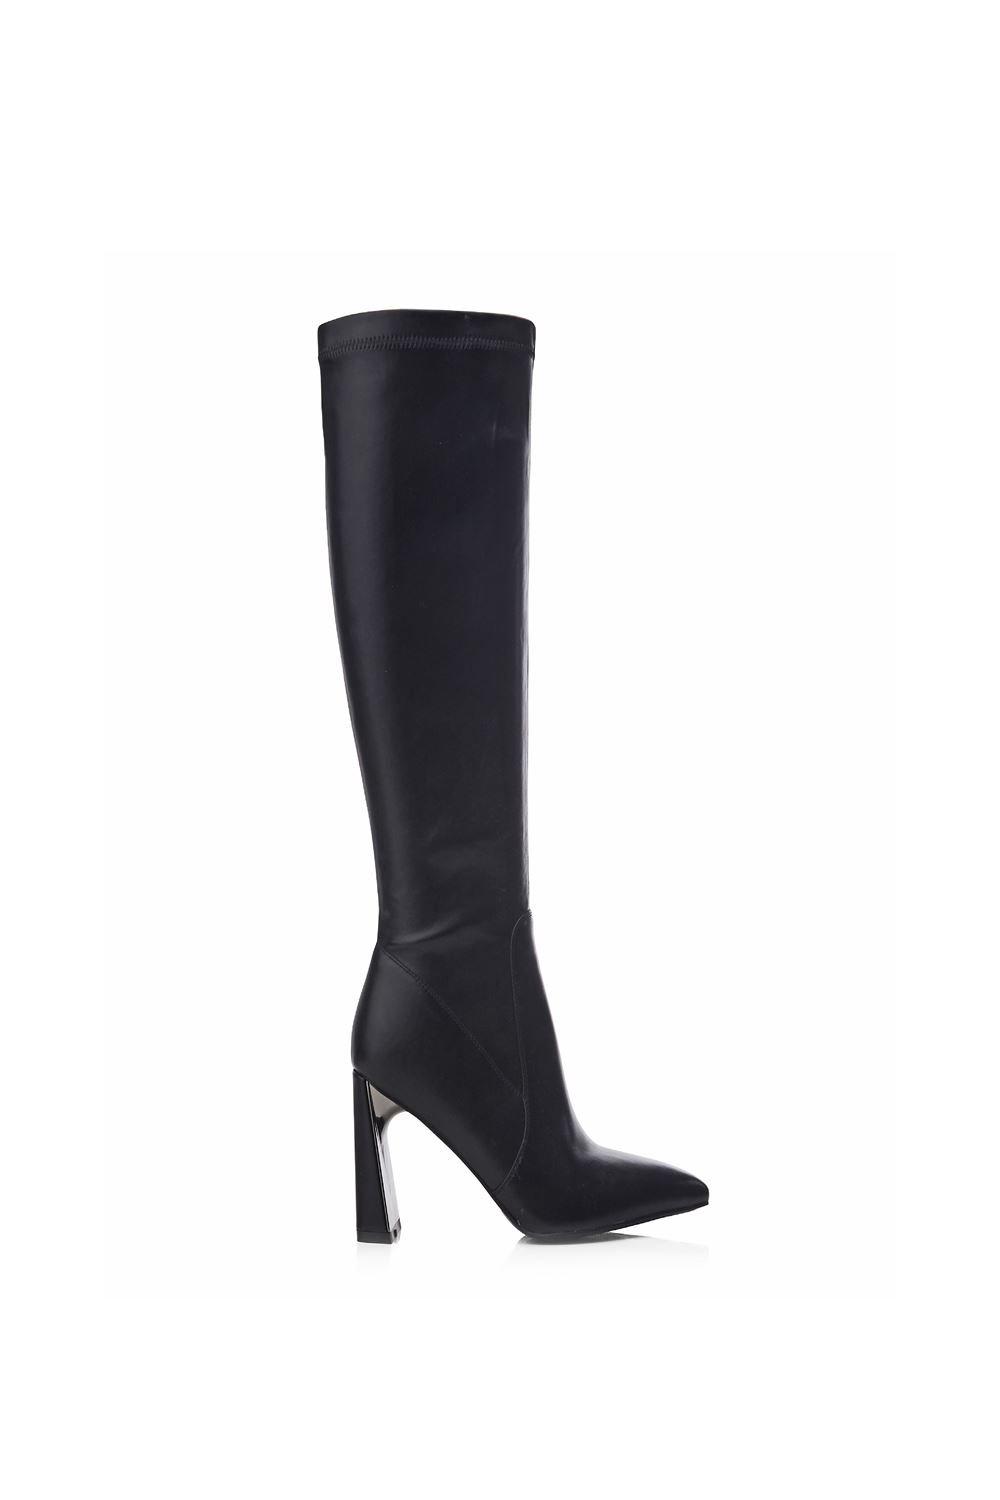 Boots | 'Tamika' Porvair Heeled Boots | Moda In Pelle